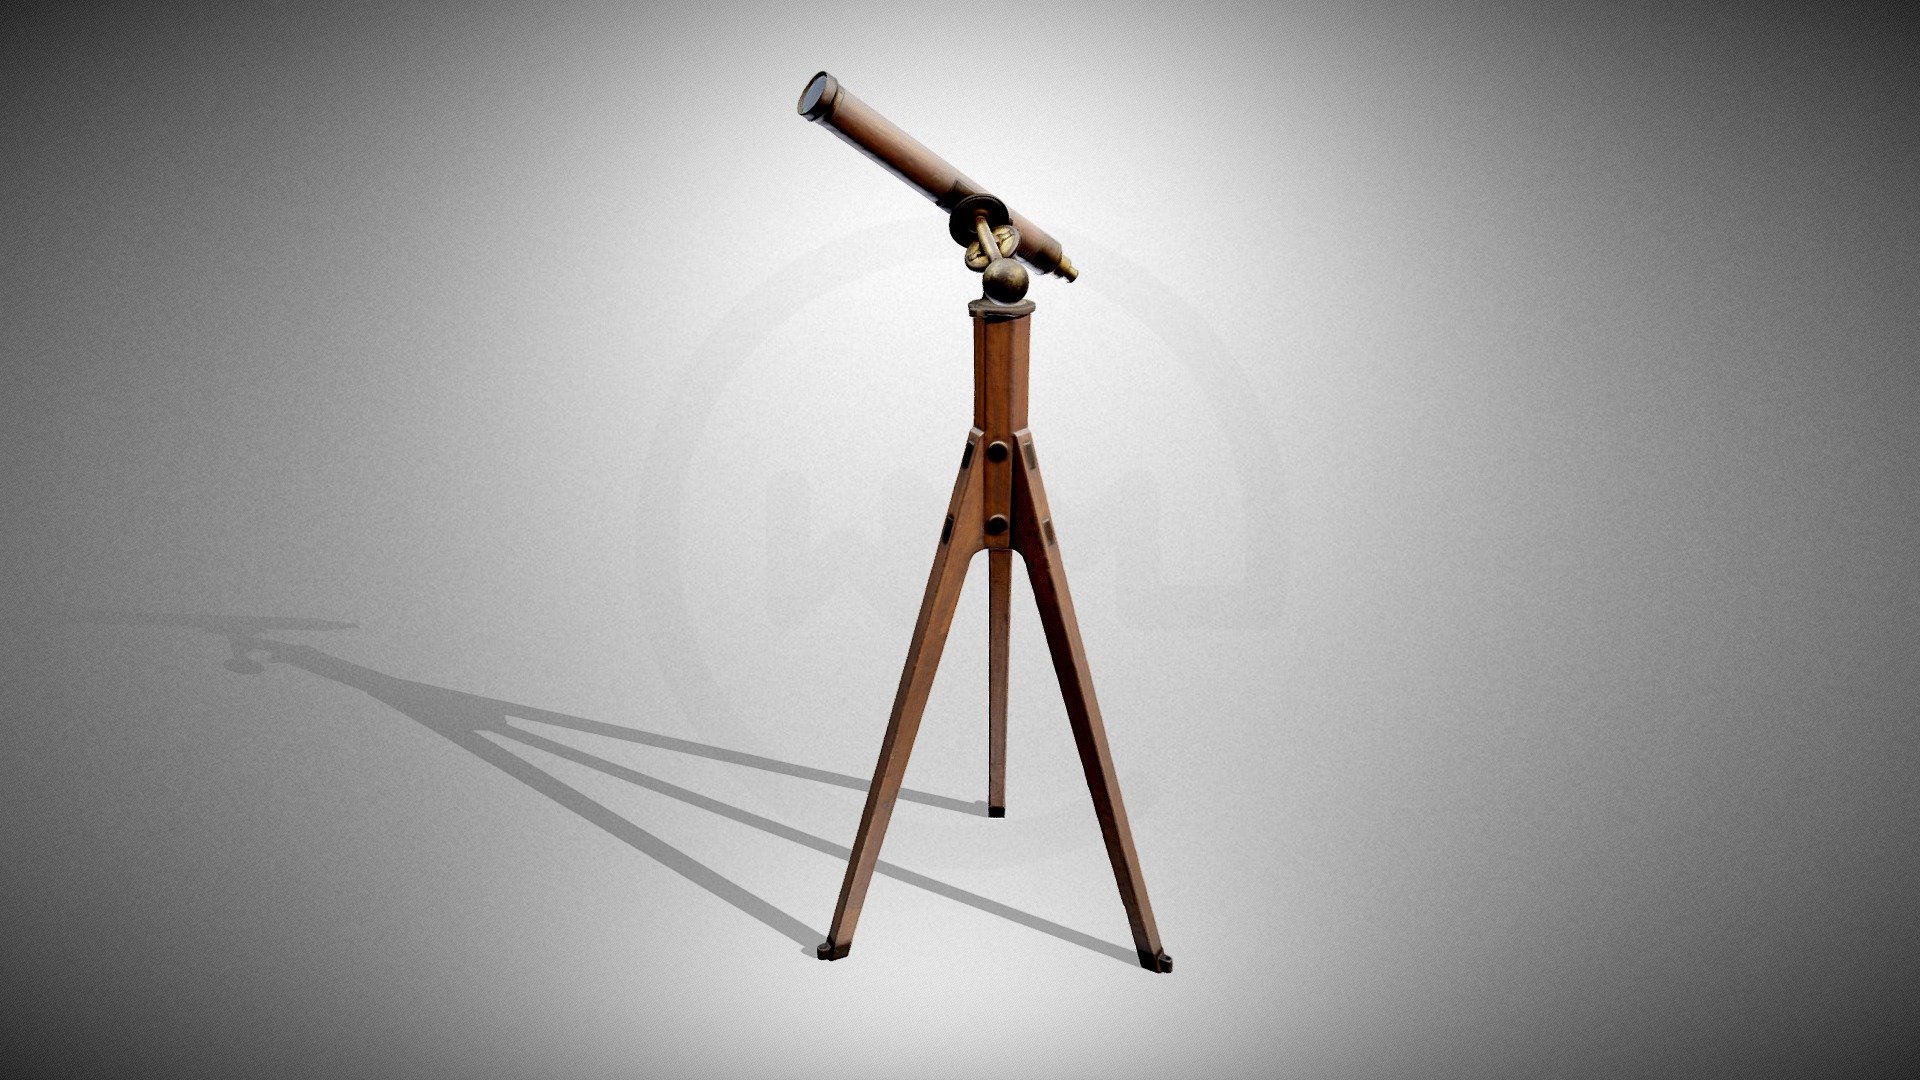 The presented item is a refracting telescope on a tall equatorial mount tripod. The tube is made of wood, the 8 cm diameter objective and the retractable eyepiece are fixed in brass rings at opposite ends of the tube. The spotting scope is attached to the declination axis, which ends in a spherical metal counterweight on the other side. The declination axis is movably attached to the hour-angle axis.
The telescope was of compact size and offered quick disassembly, making it a convenient portable instrument. It was brought to the Astronomical Observatory in Kraków in 1834 by Józef Łęski.

Time and Place of creation: 1832, Vienna, Munich, Germany

https://muzea.malopolska.pl/en/objects-list/2780

Inventory number: 16653; 1949/V

Museum: Jagiellonian University Museum Collegium Maius

Digitalisation: Digitalisation: RDW MIC, Virtual Małopolska project - Comet seeker - Download Free 3D model by Virtual Museums of Małopolska (@WirtualneMuzeaMalopolski) 3d model